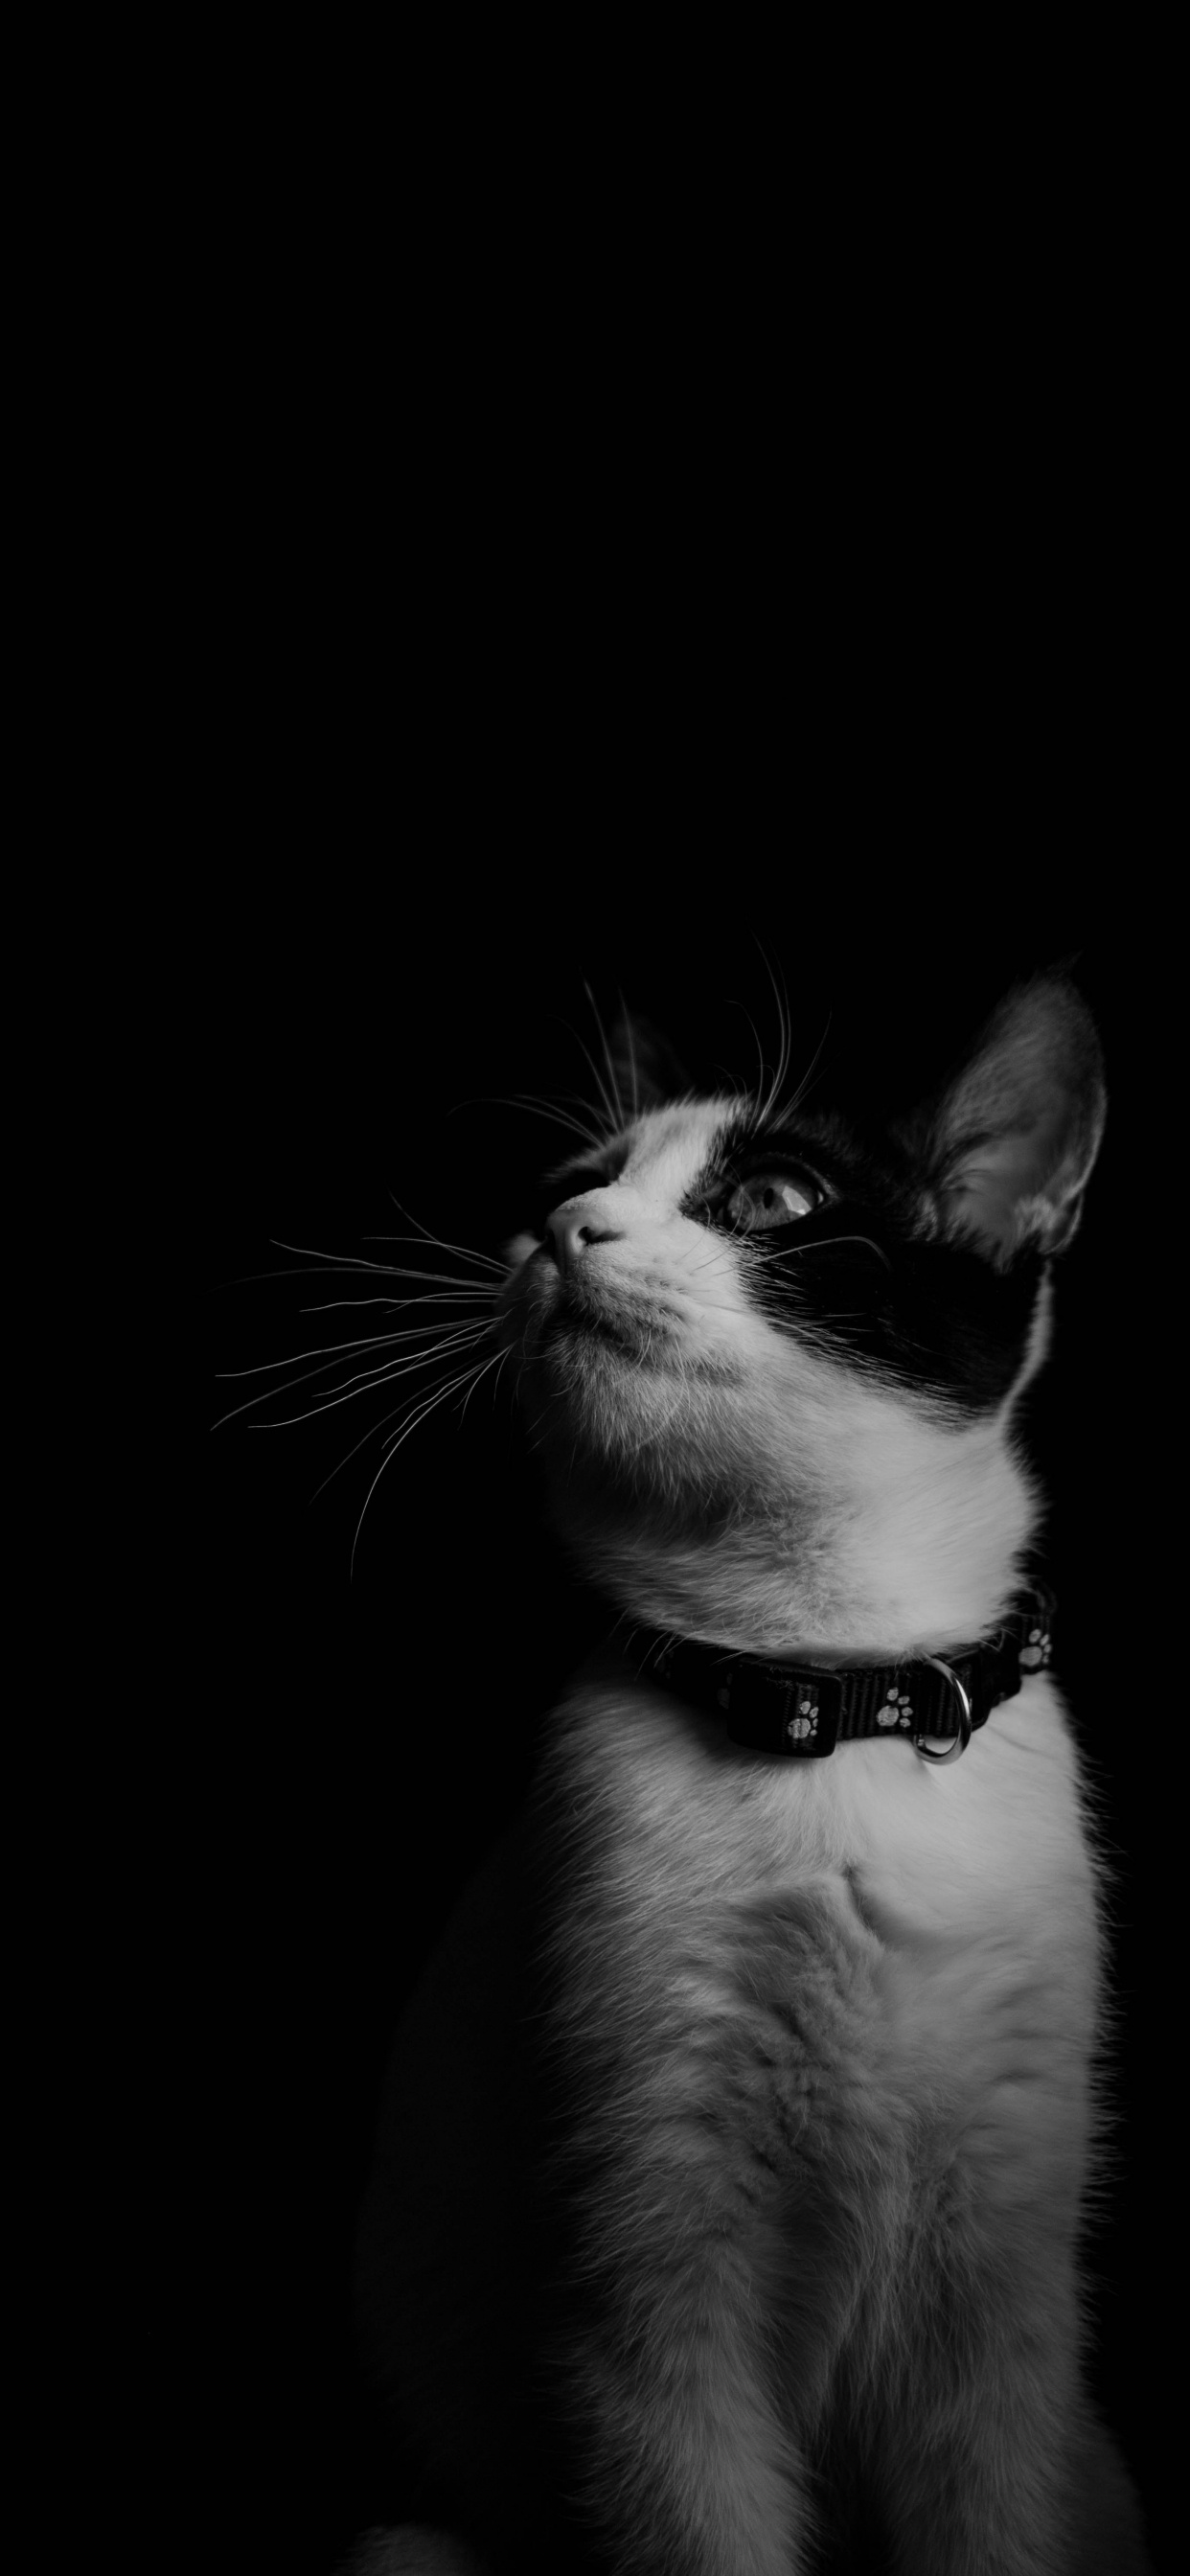 Grayscale Photo of Cat With Black Background. Wallpaper in 1242x2688 Resolution